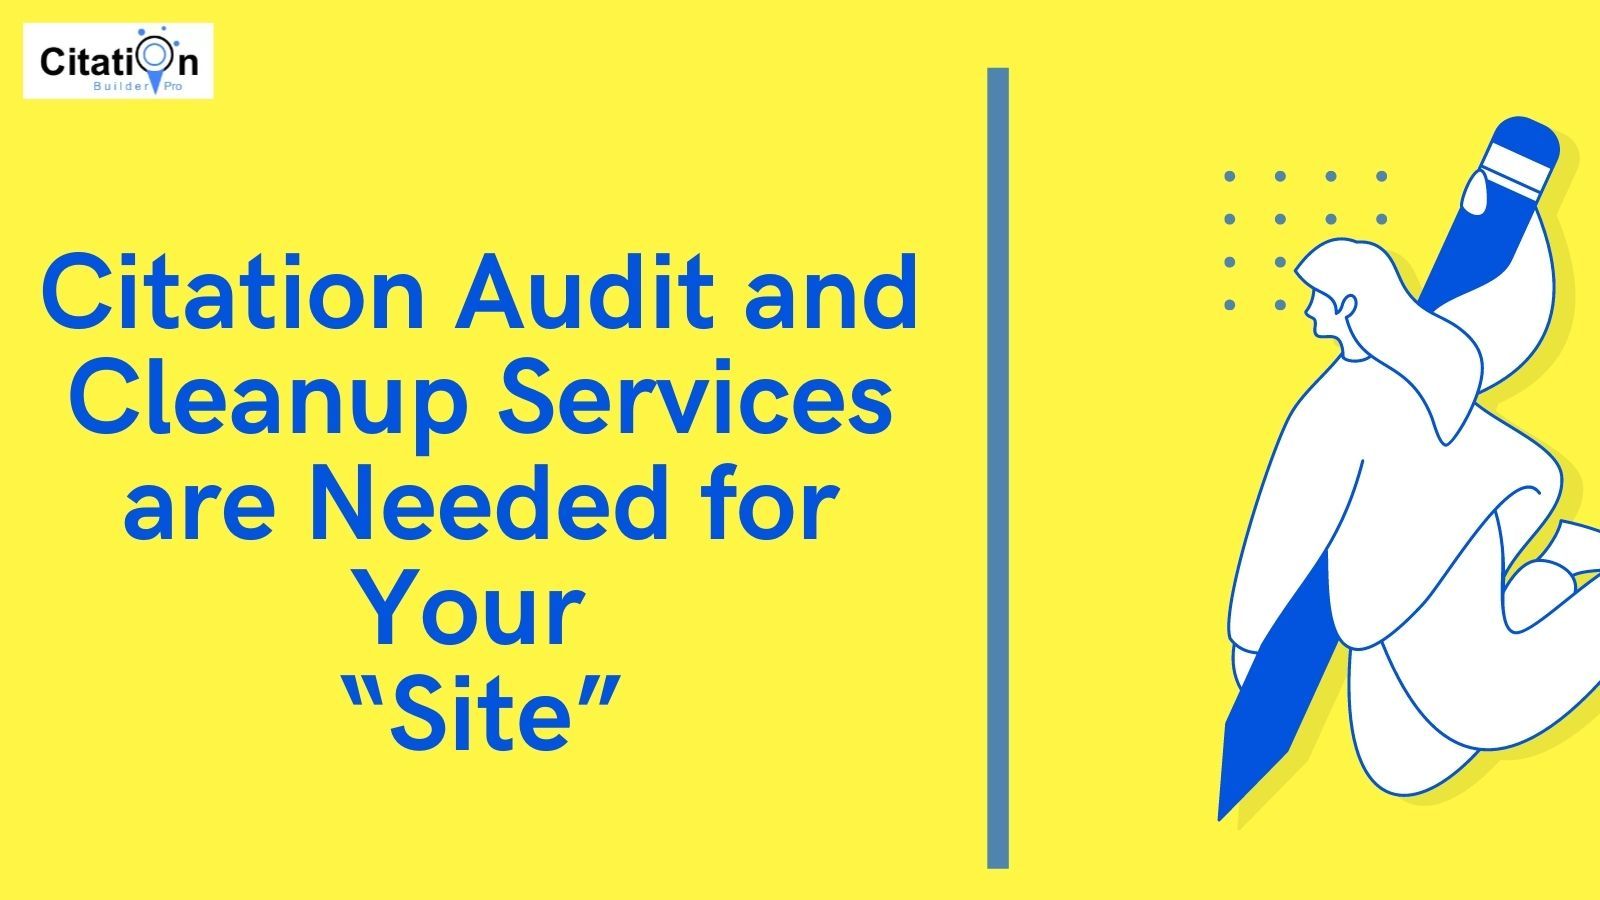 Citation Audit and Cleanup Services are Needed for Your Site